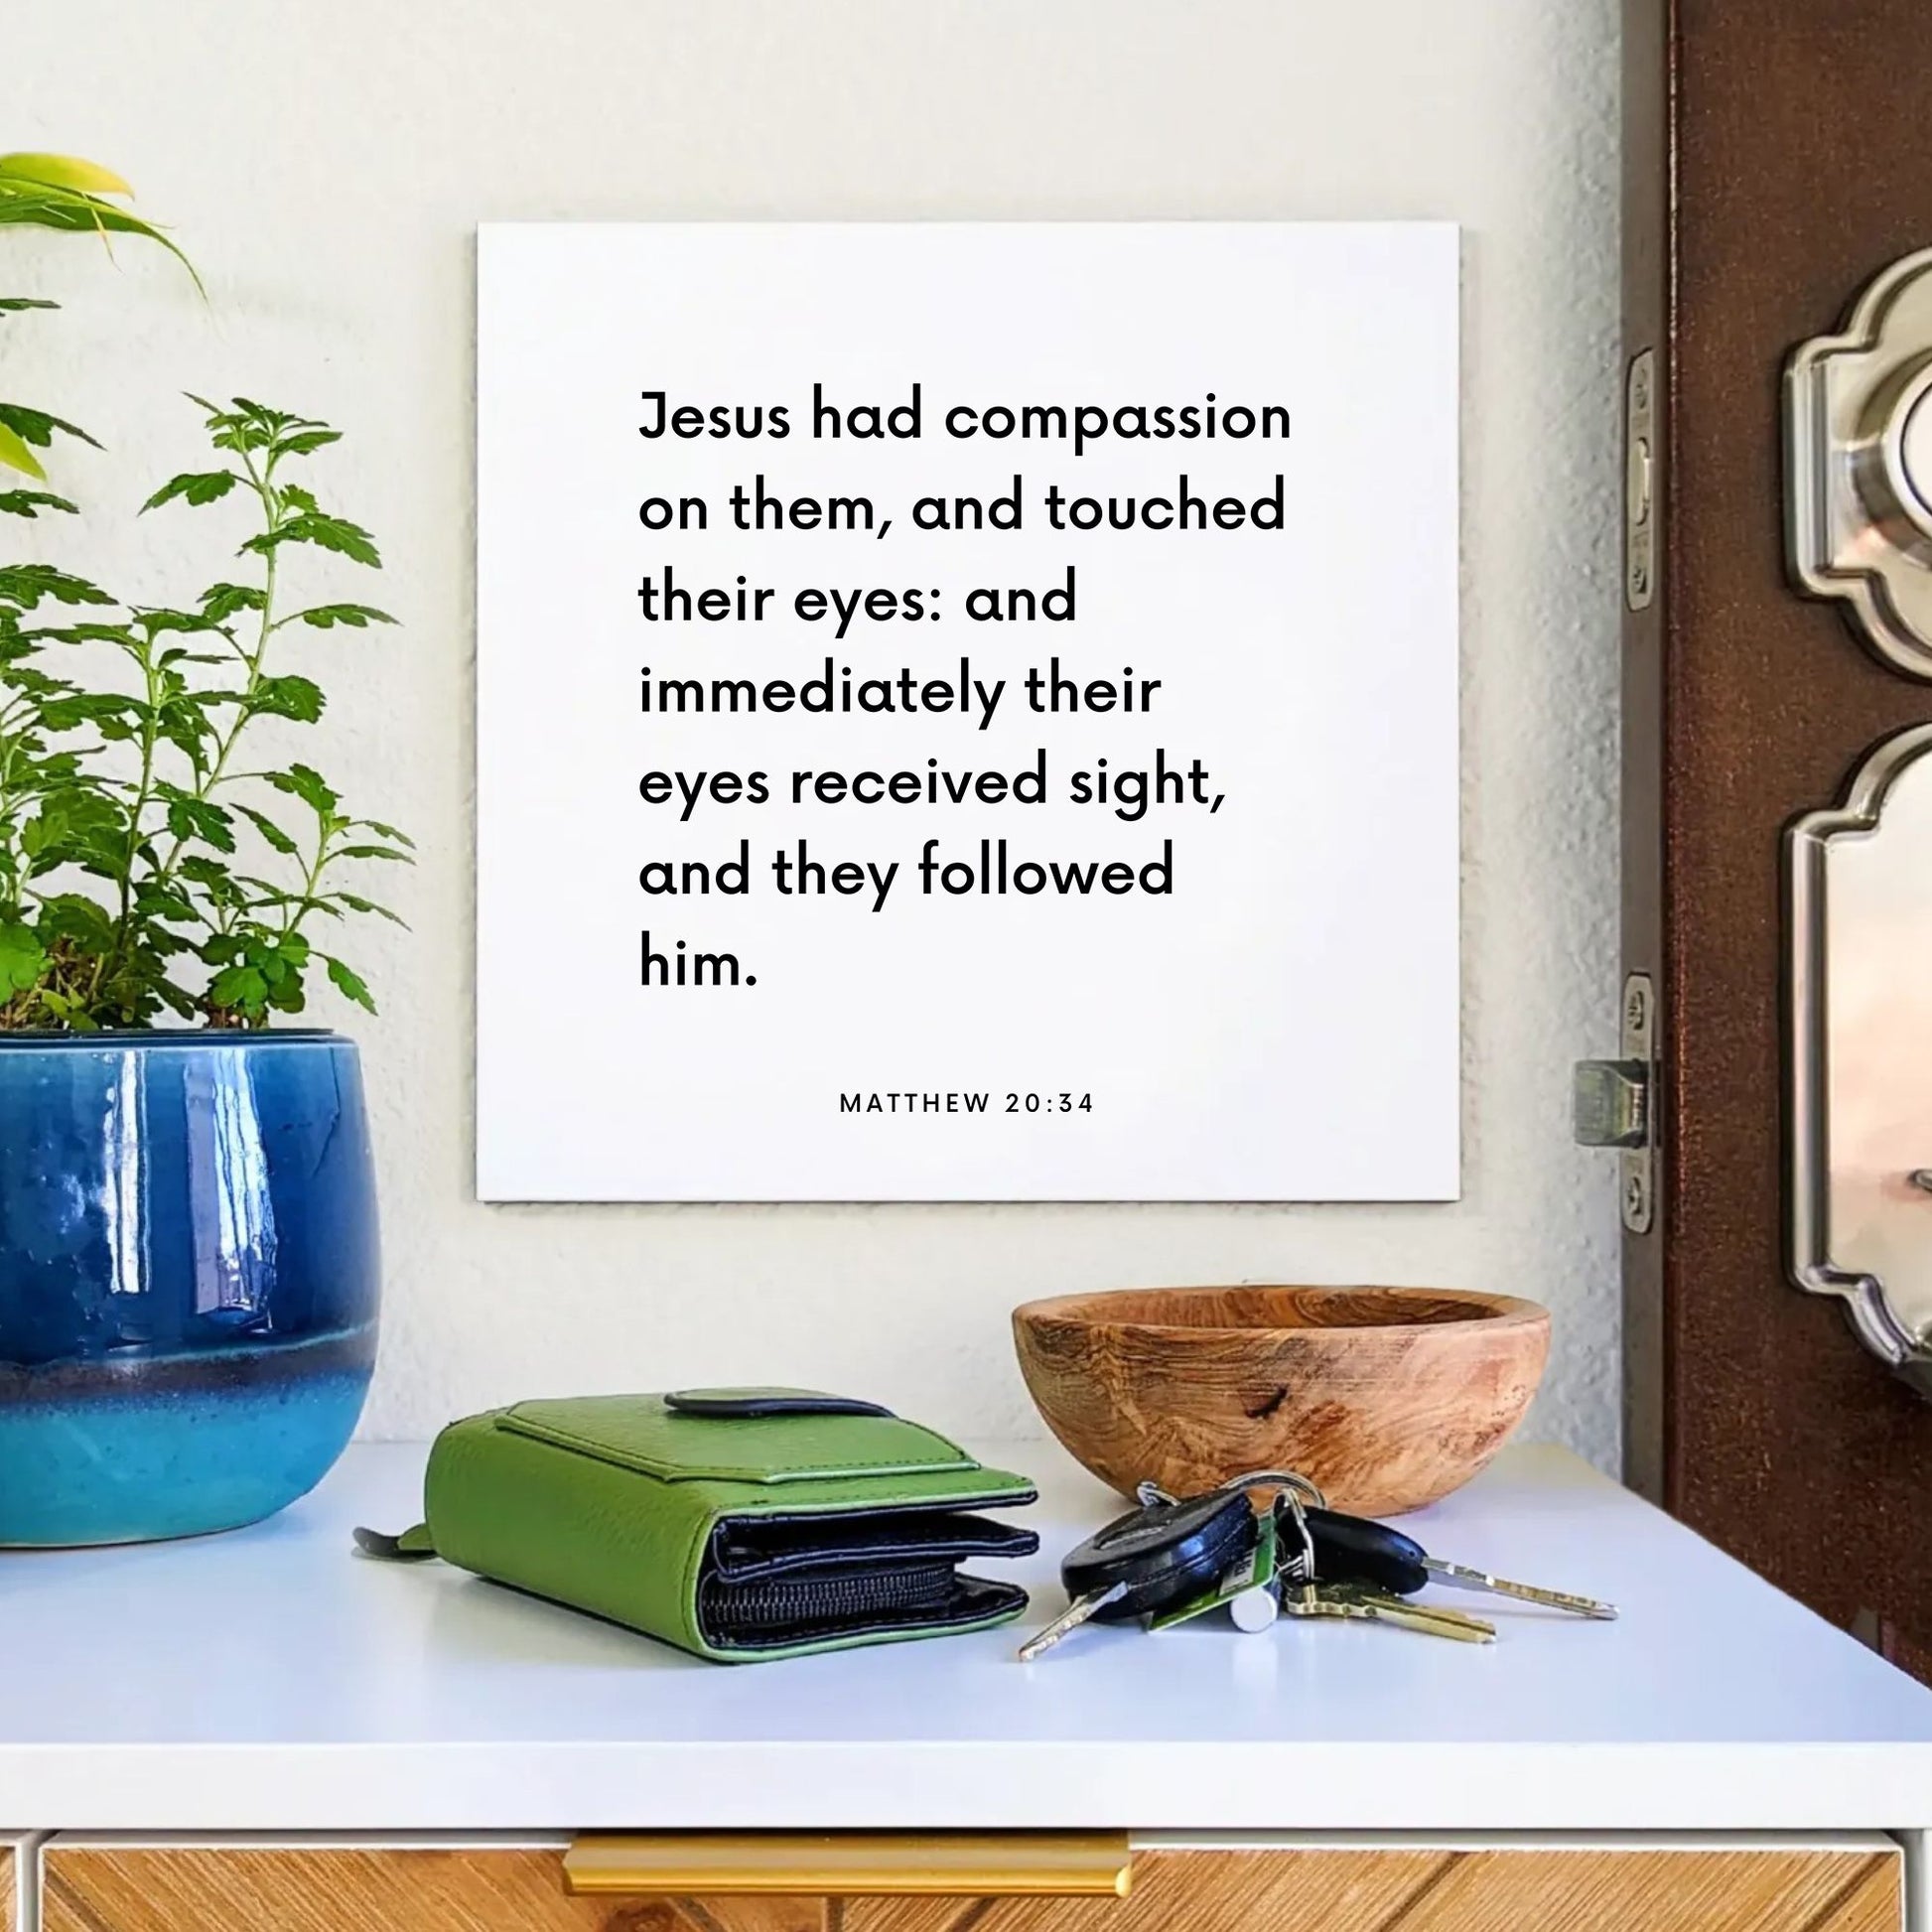 Entryway mouting of the scripture tile for Matthew 20:34 - "Jesus had compassion on them, and touched their eyes"